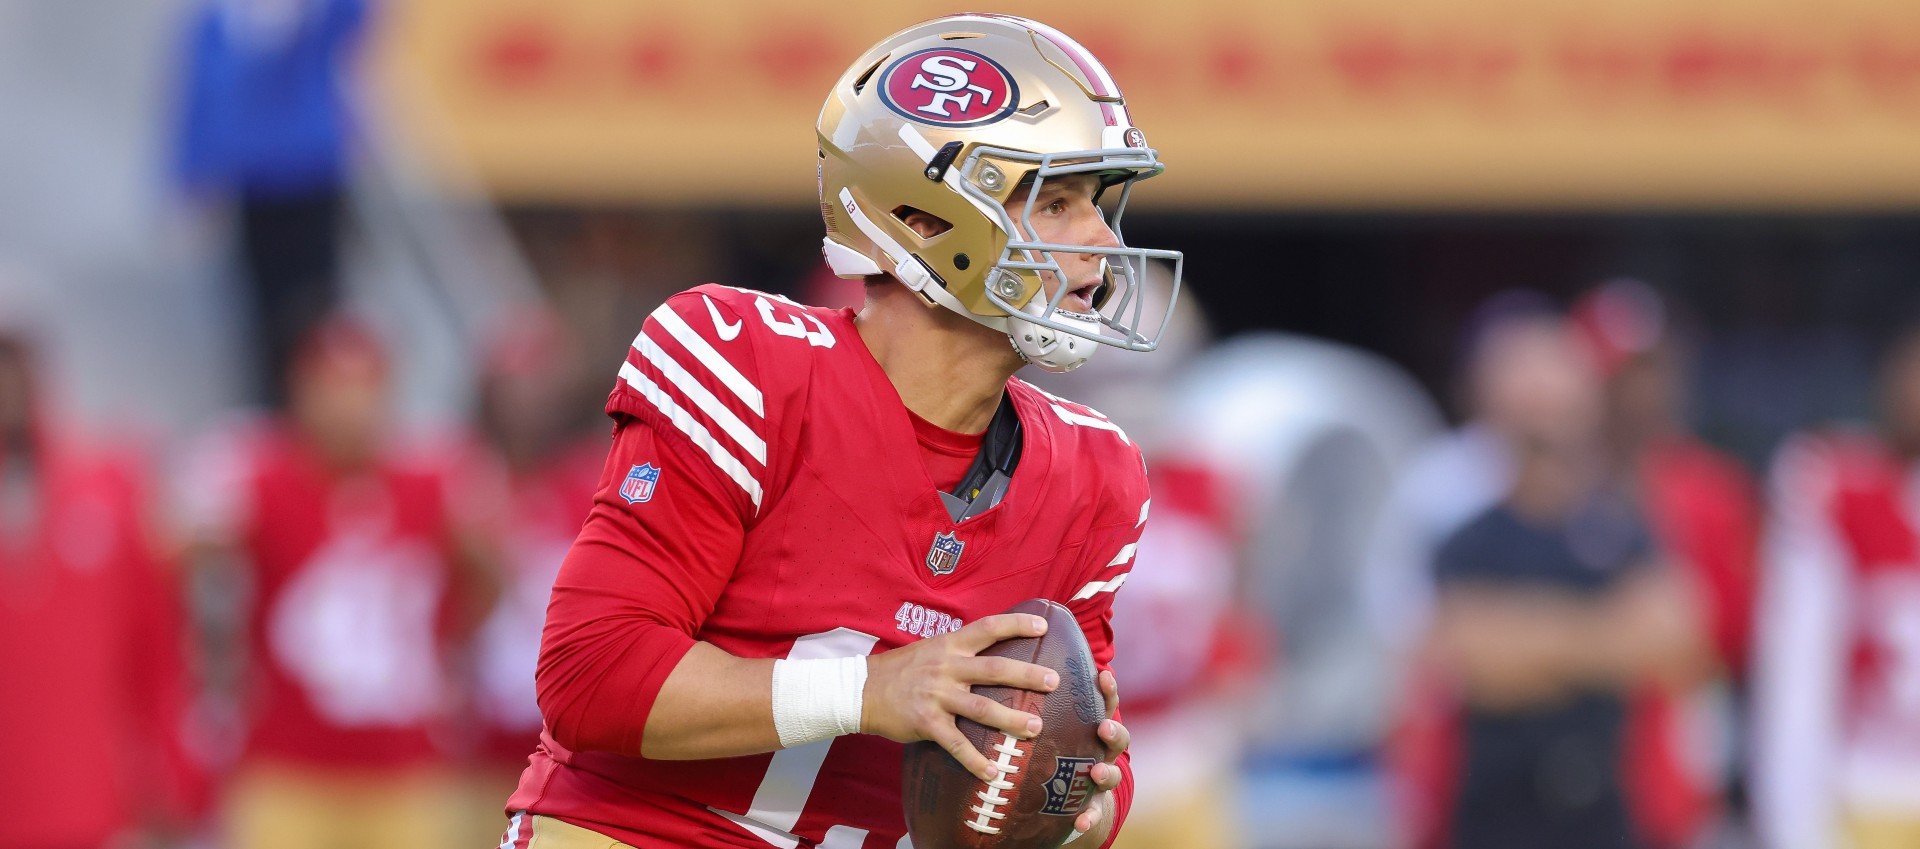 49ers vs Cowboys Prediction, Prop Bets & Best Bets - NFC Divisional Round